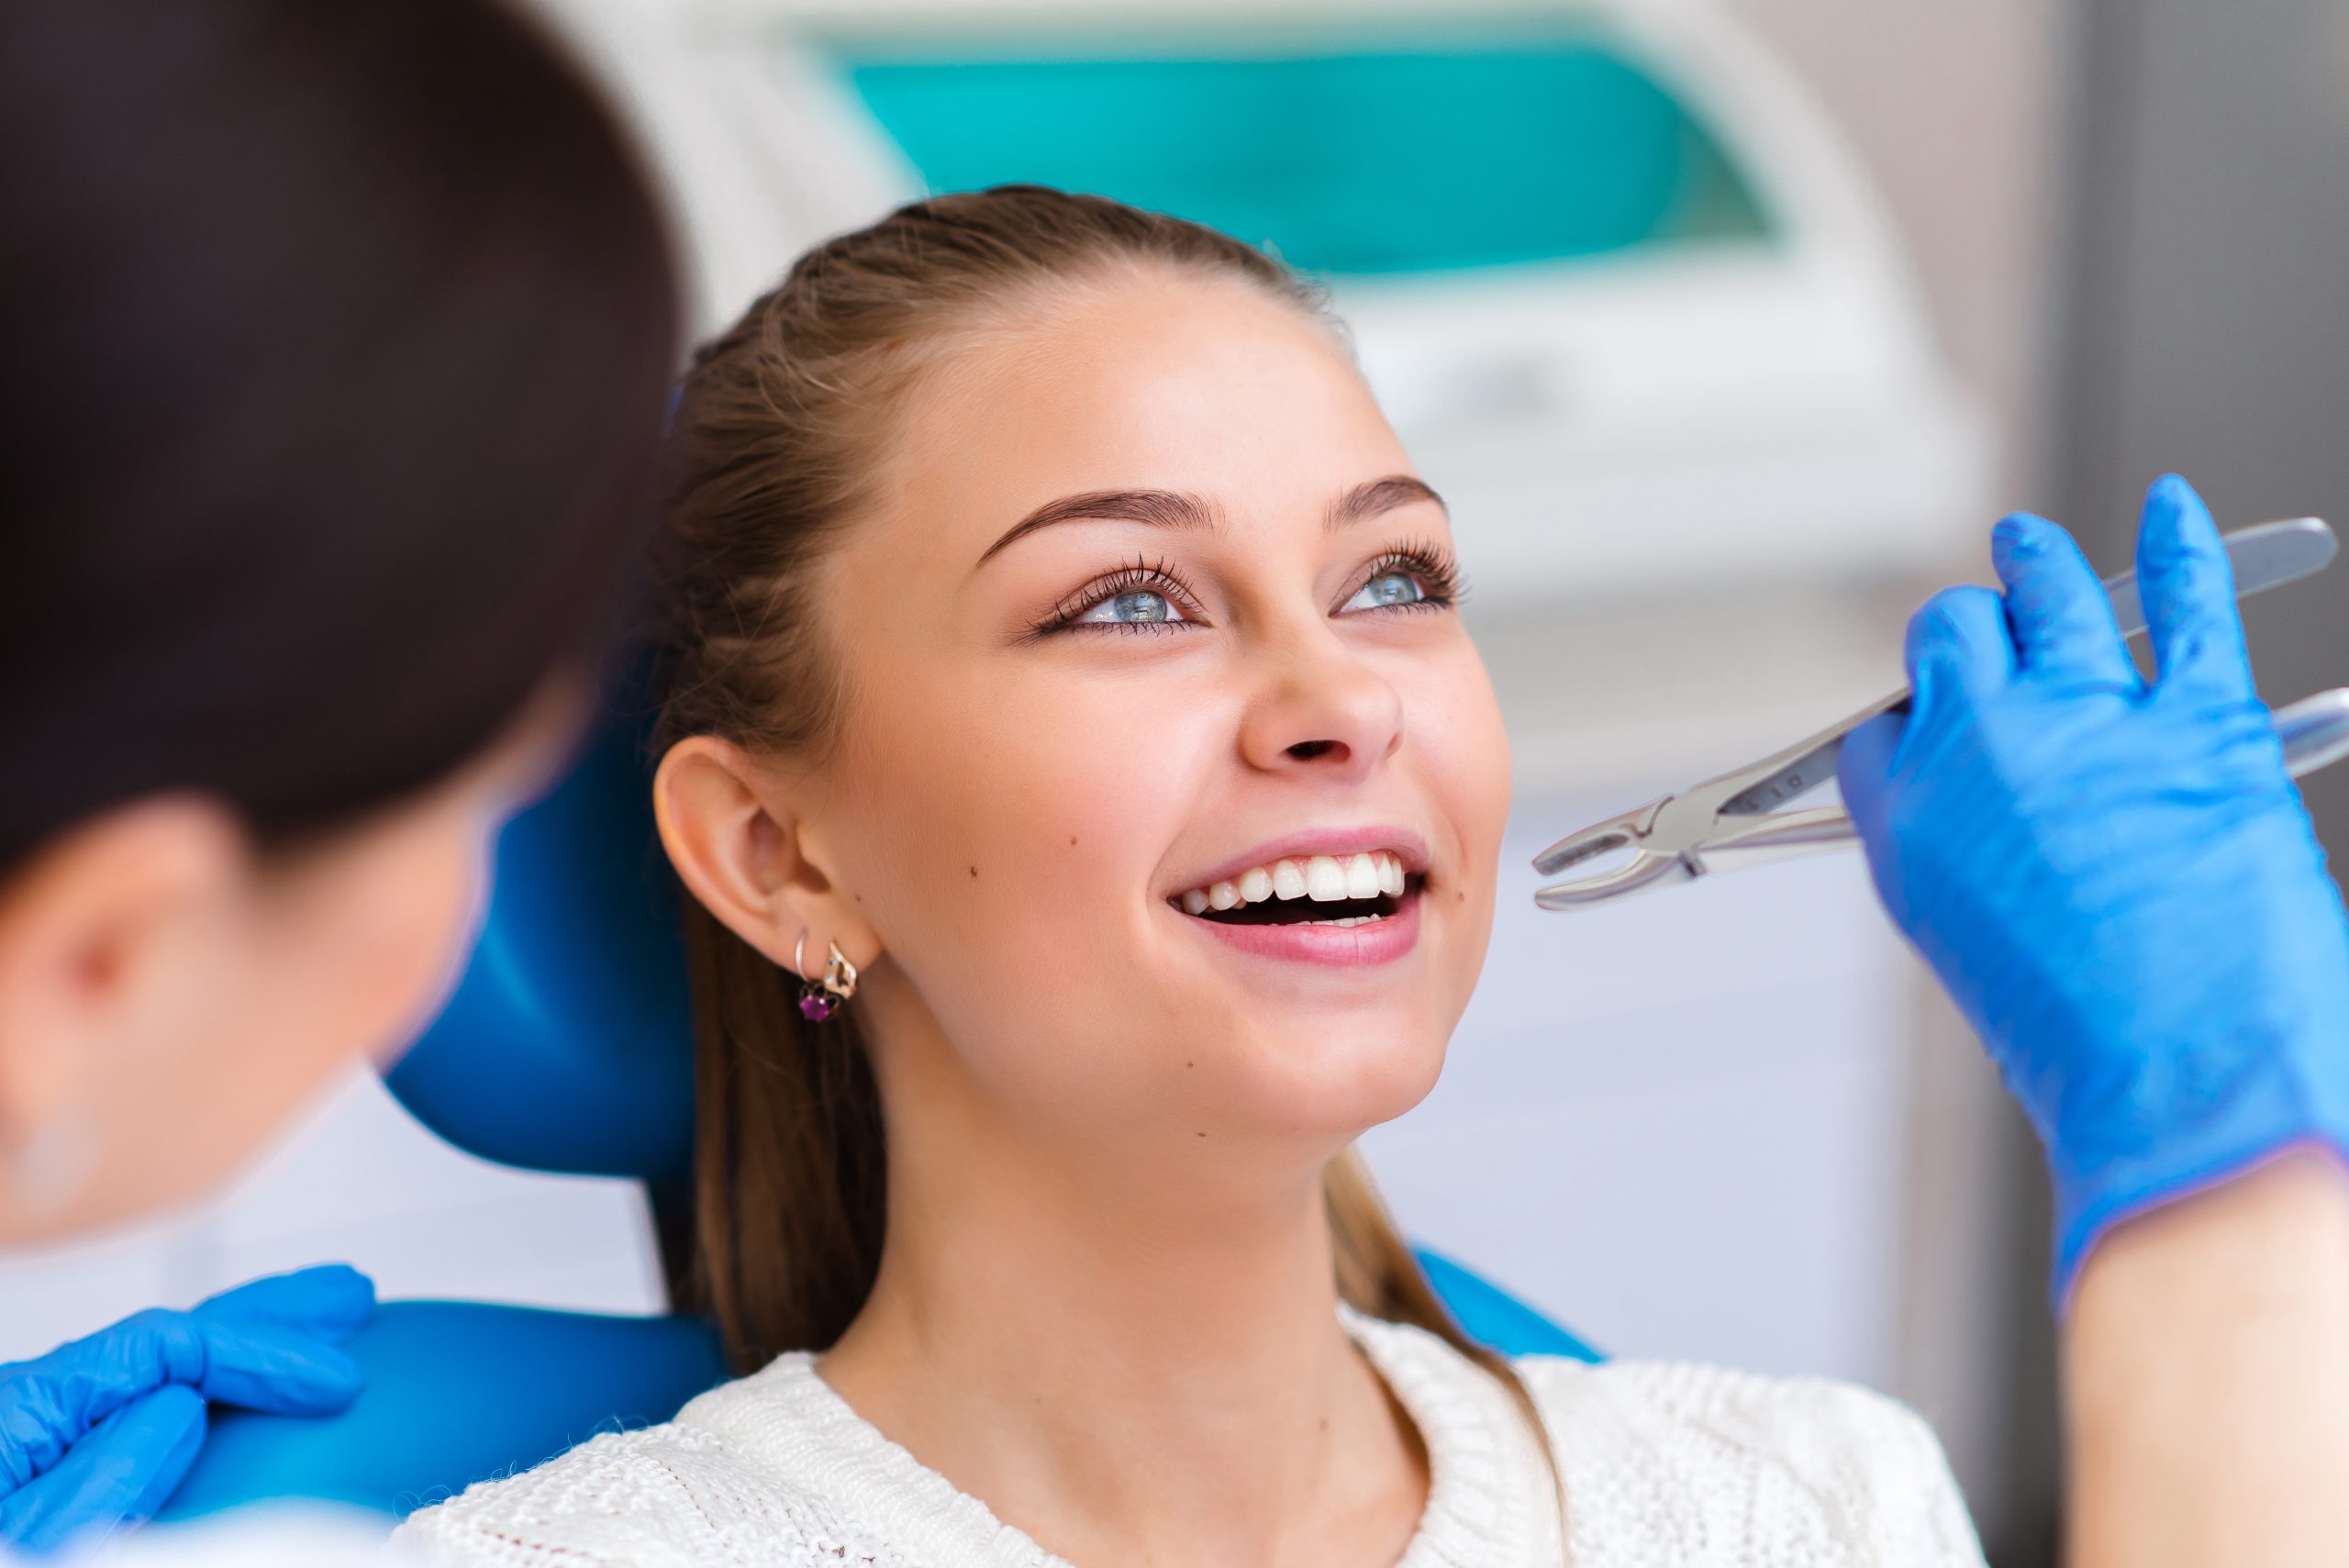 What Should I Do After a Tooth Extraction in Herndon, VA?